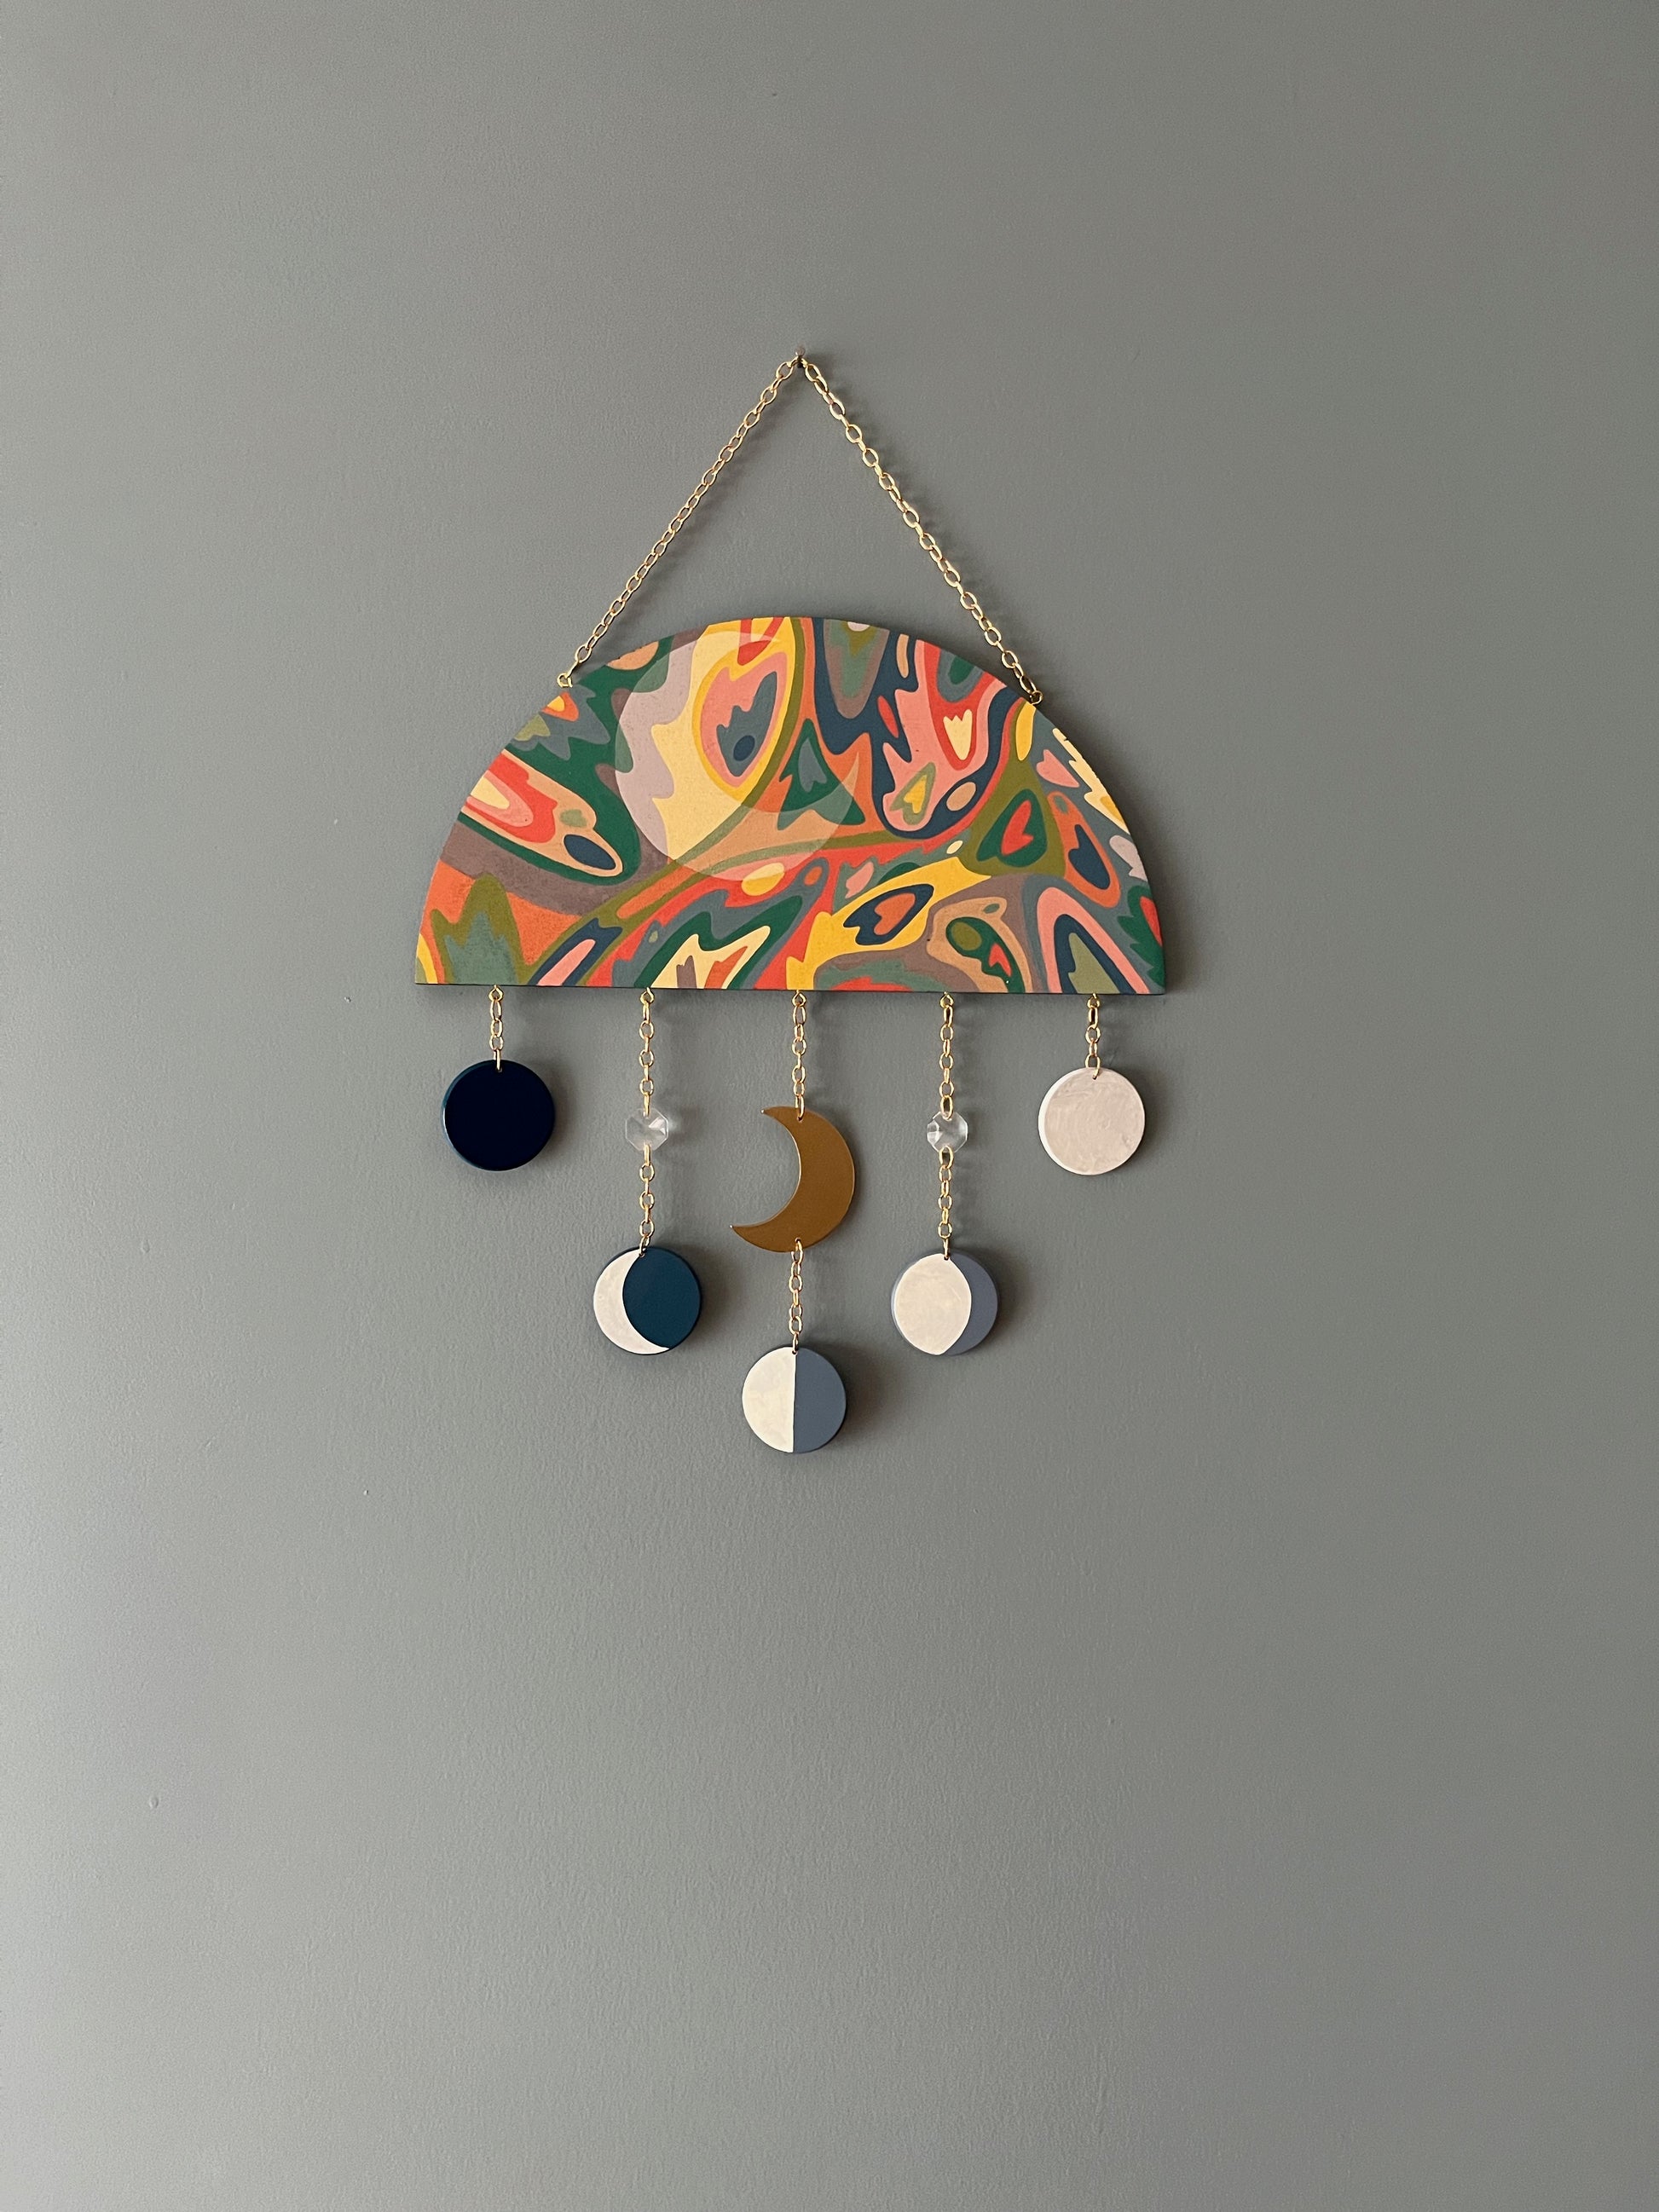 Hand painted wooden moon phase & chain hanger with sun catcher charms Decor from GemCadet